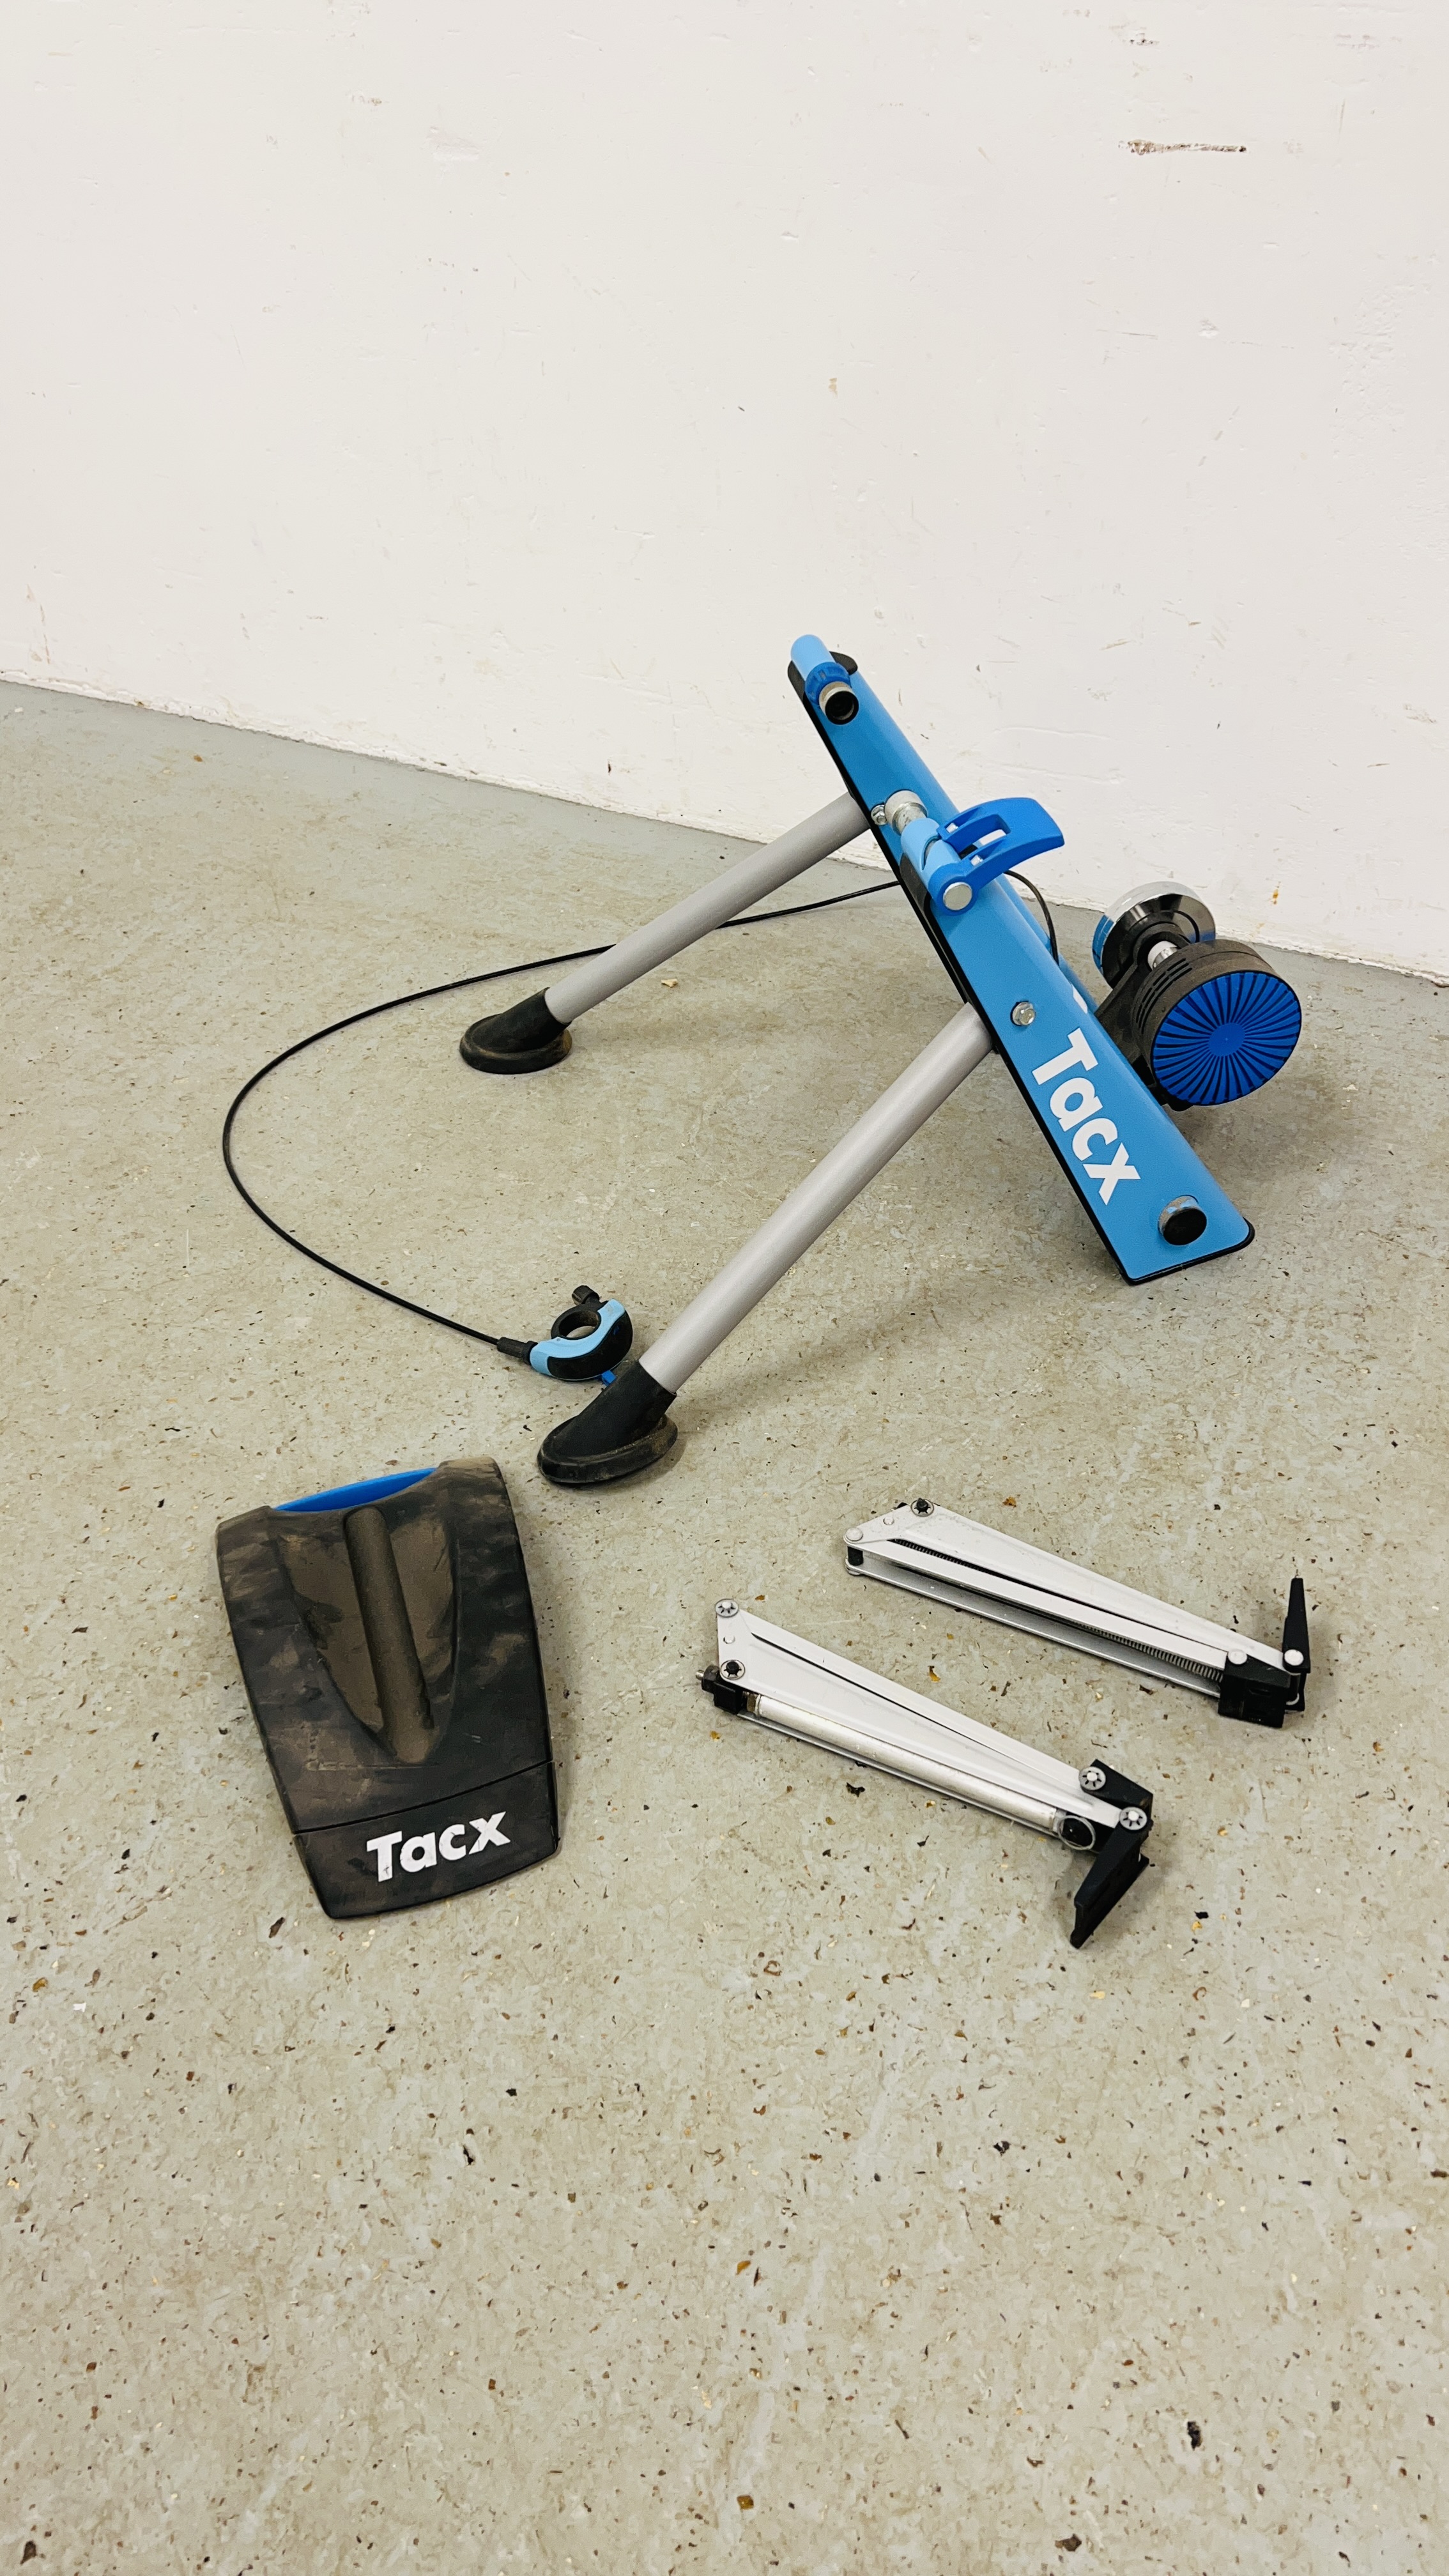 A TACX CYCLE TRAINER - SOLD AS SEEN.